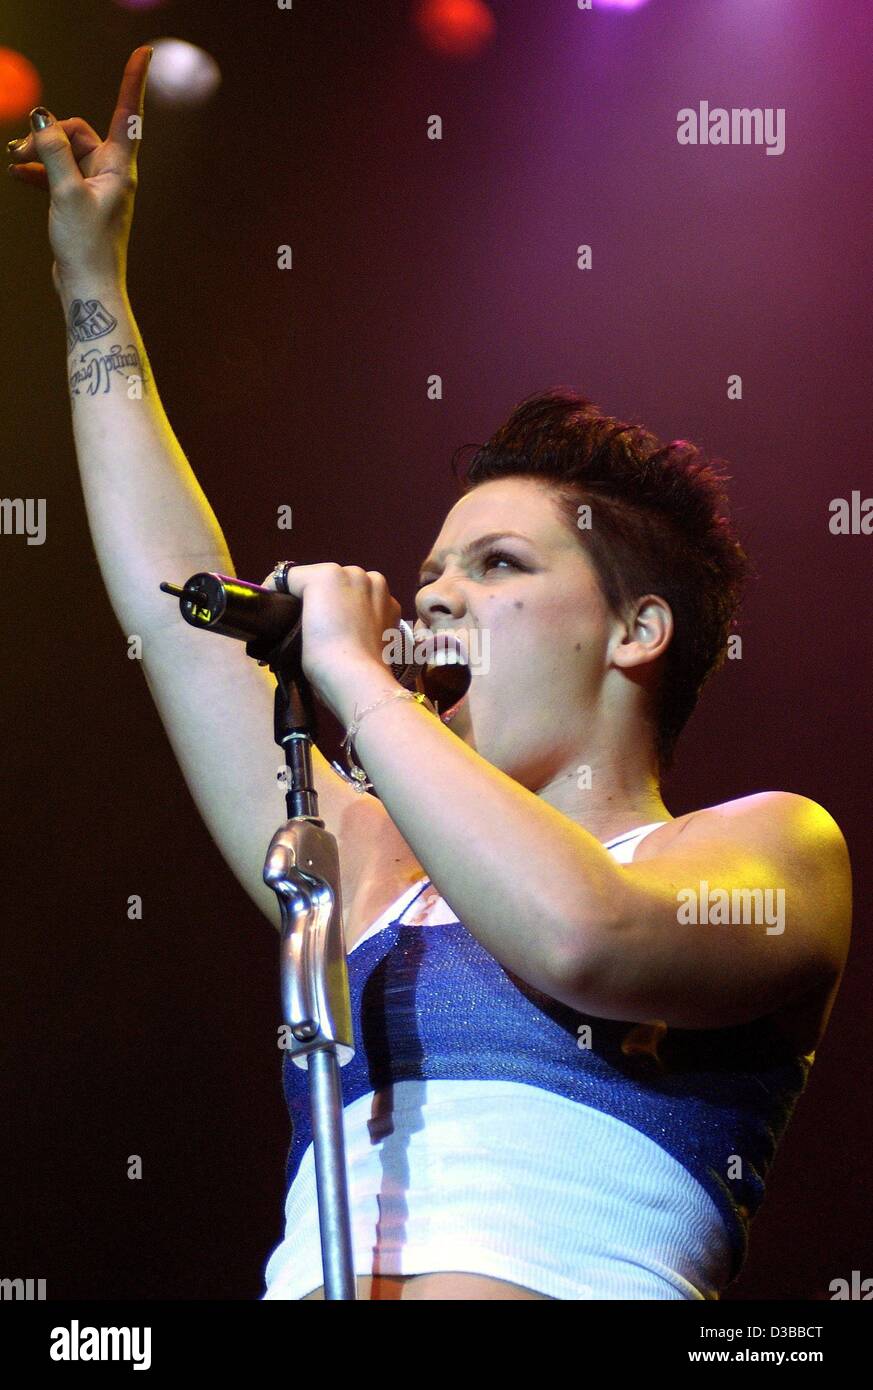 (dpa) - US pop singer Pink ('Get the Party Started') sings during her concert in Cologne, Germany, 8 November 2002. The civil name of the 23-year-old singer is Alecia Moore. Stock Photo